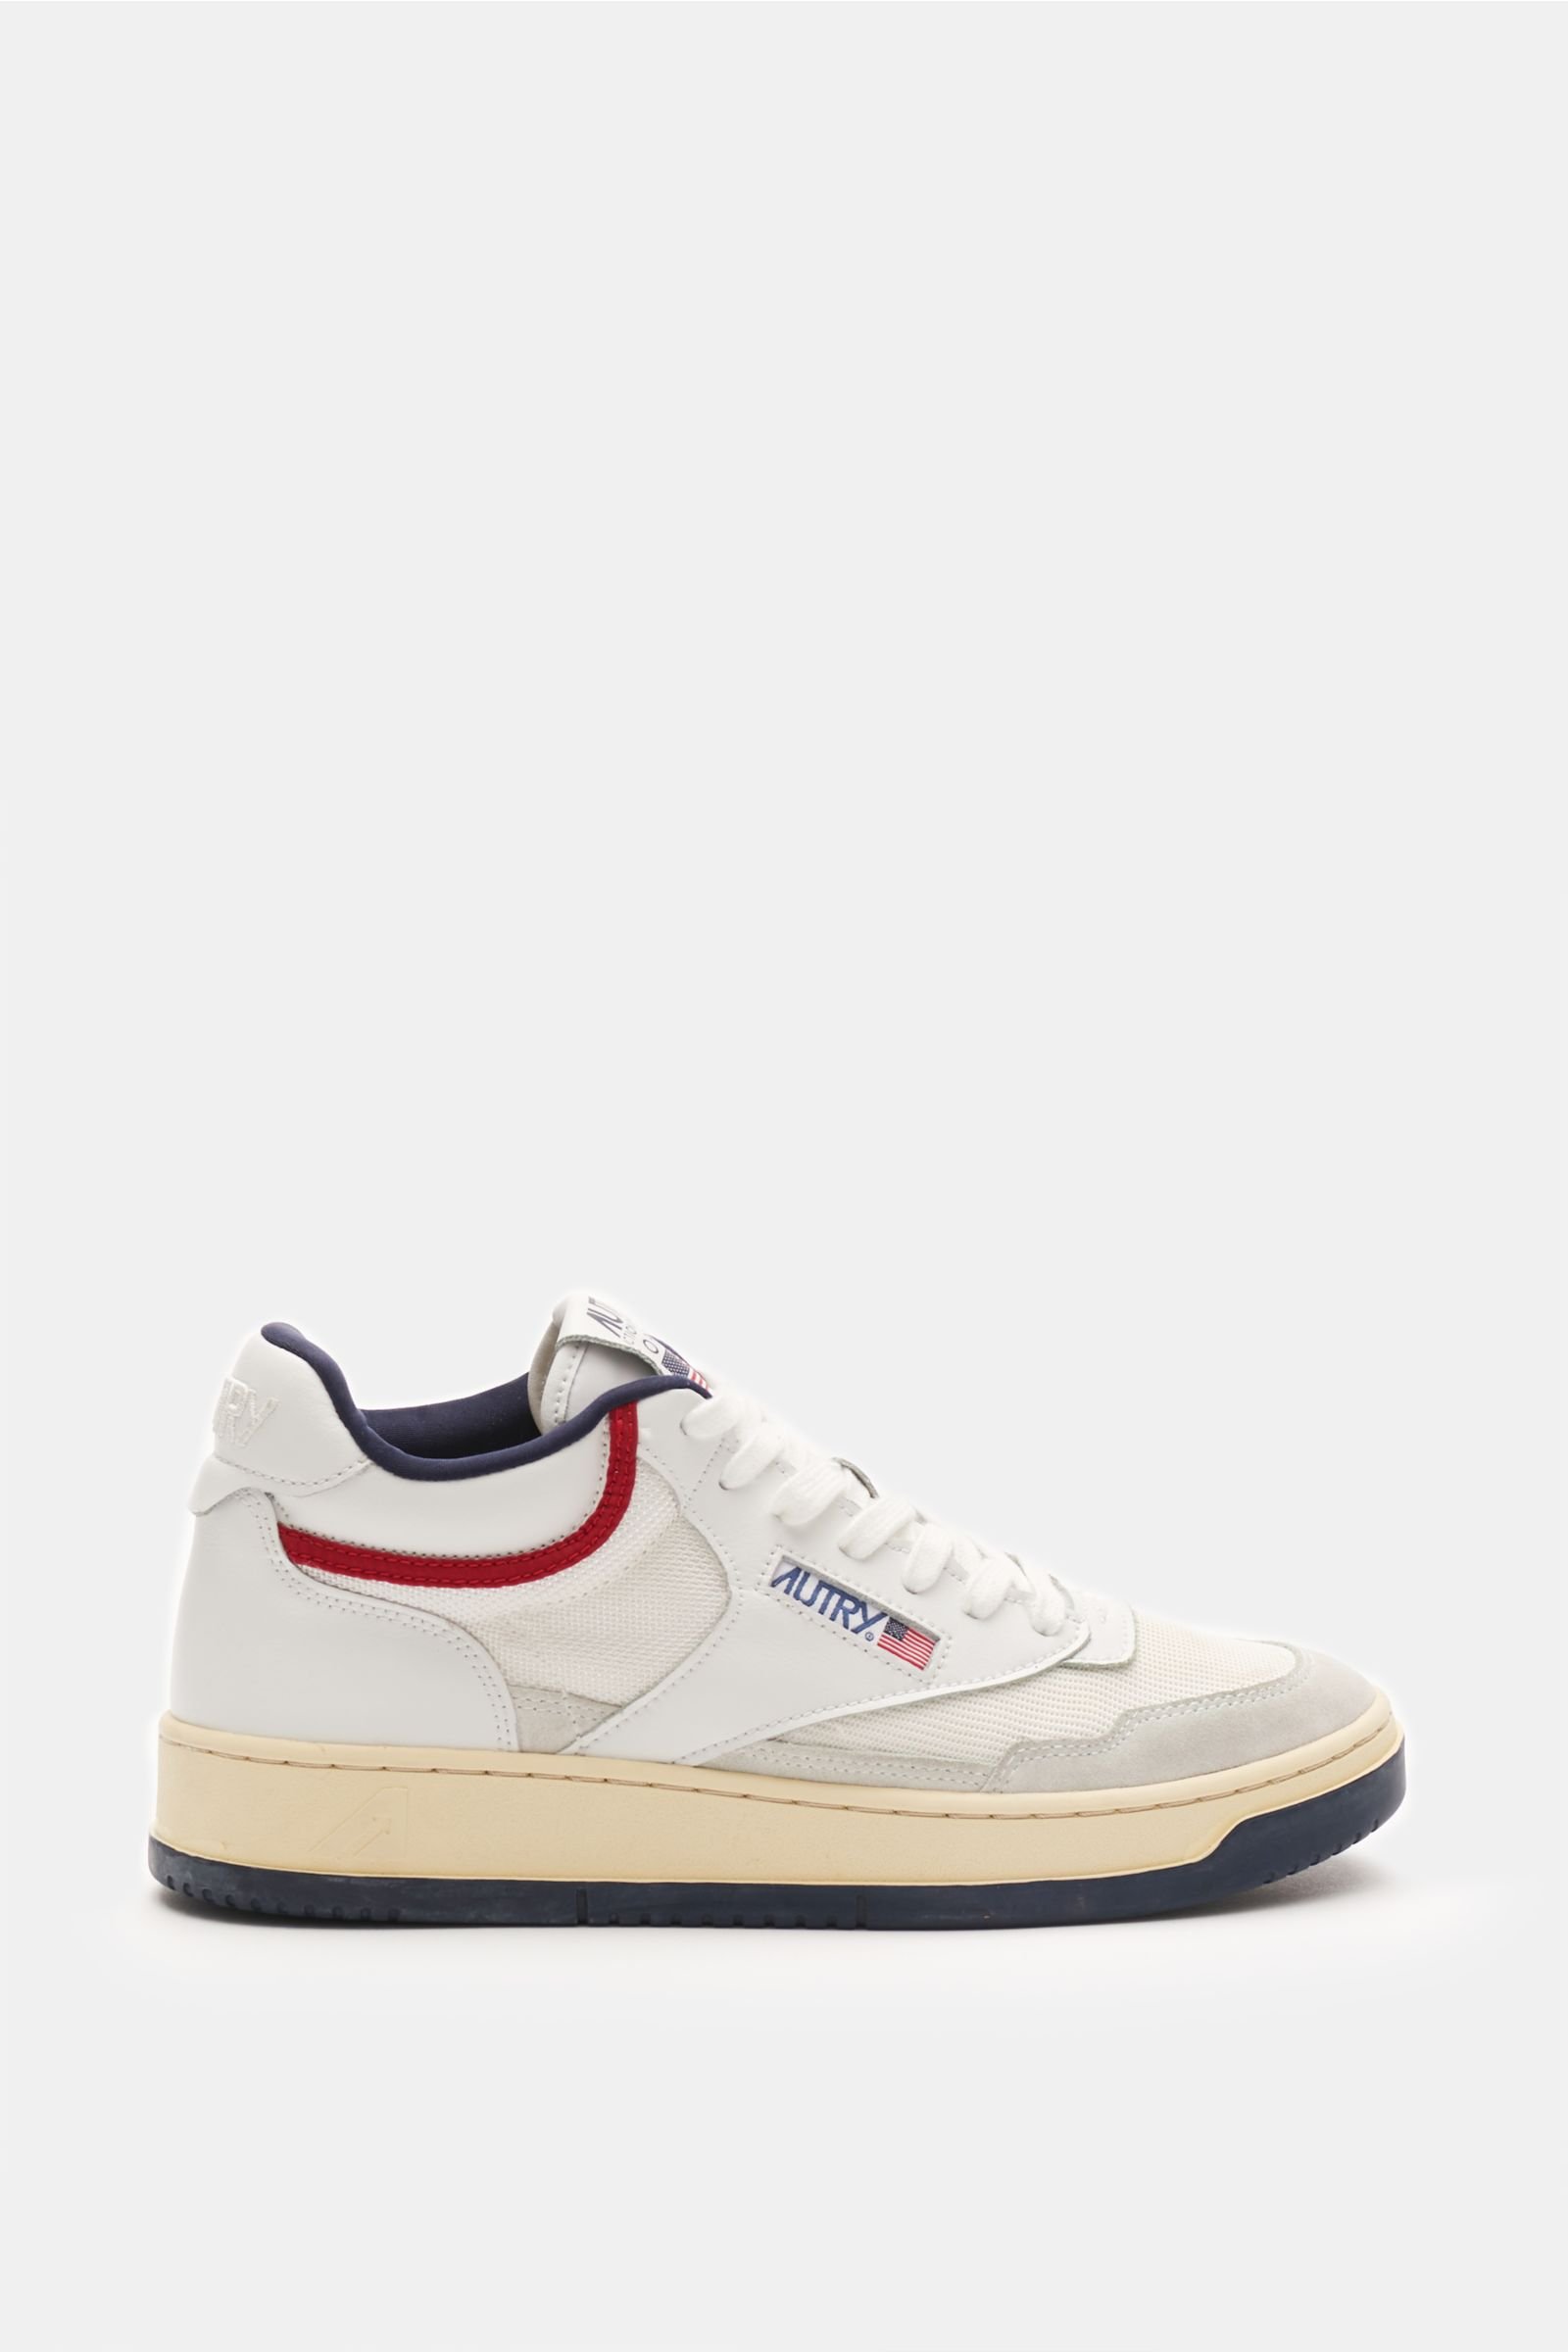 High-top sneakers 'Open Mid' white/navy/red